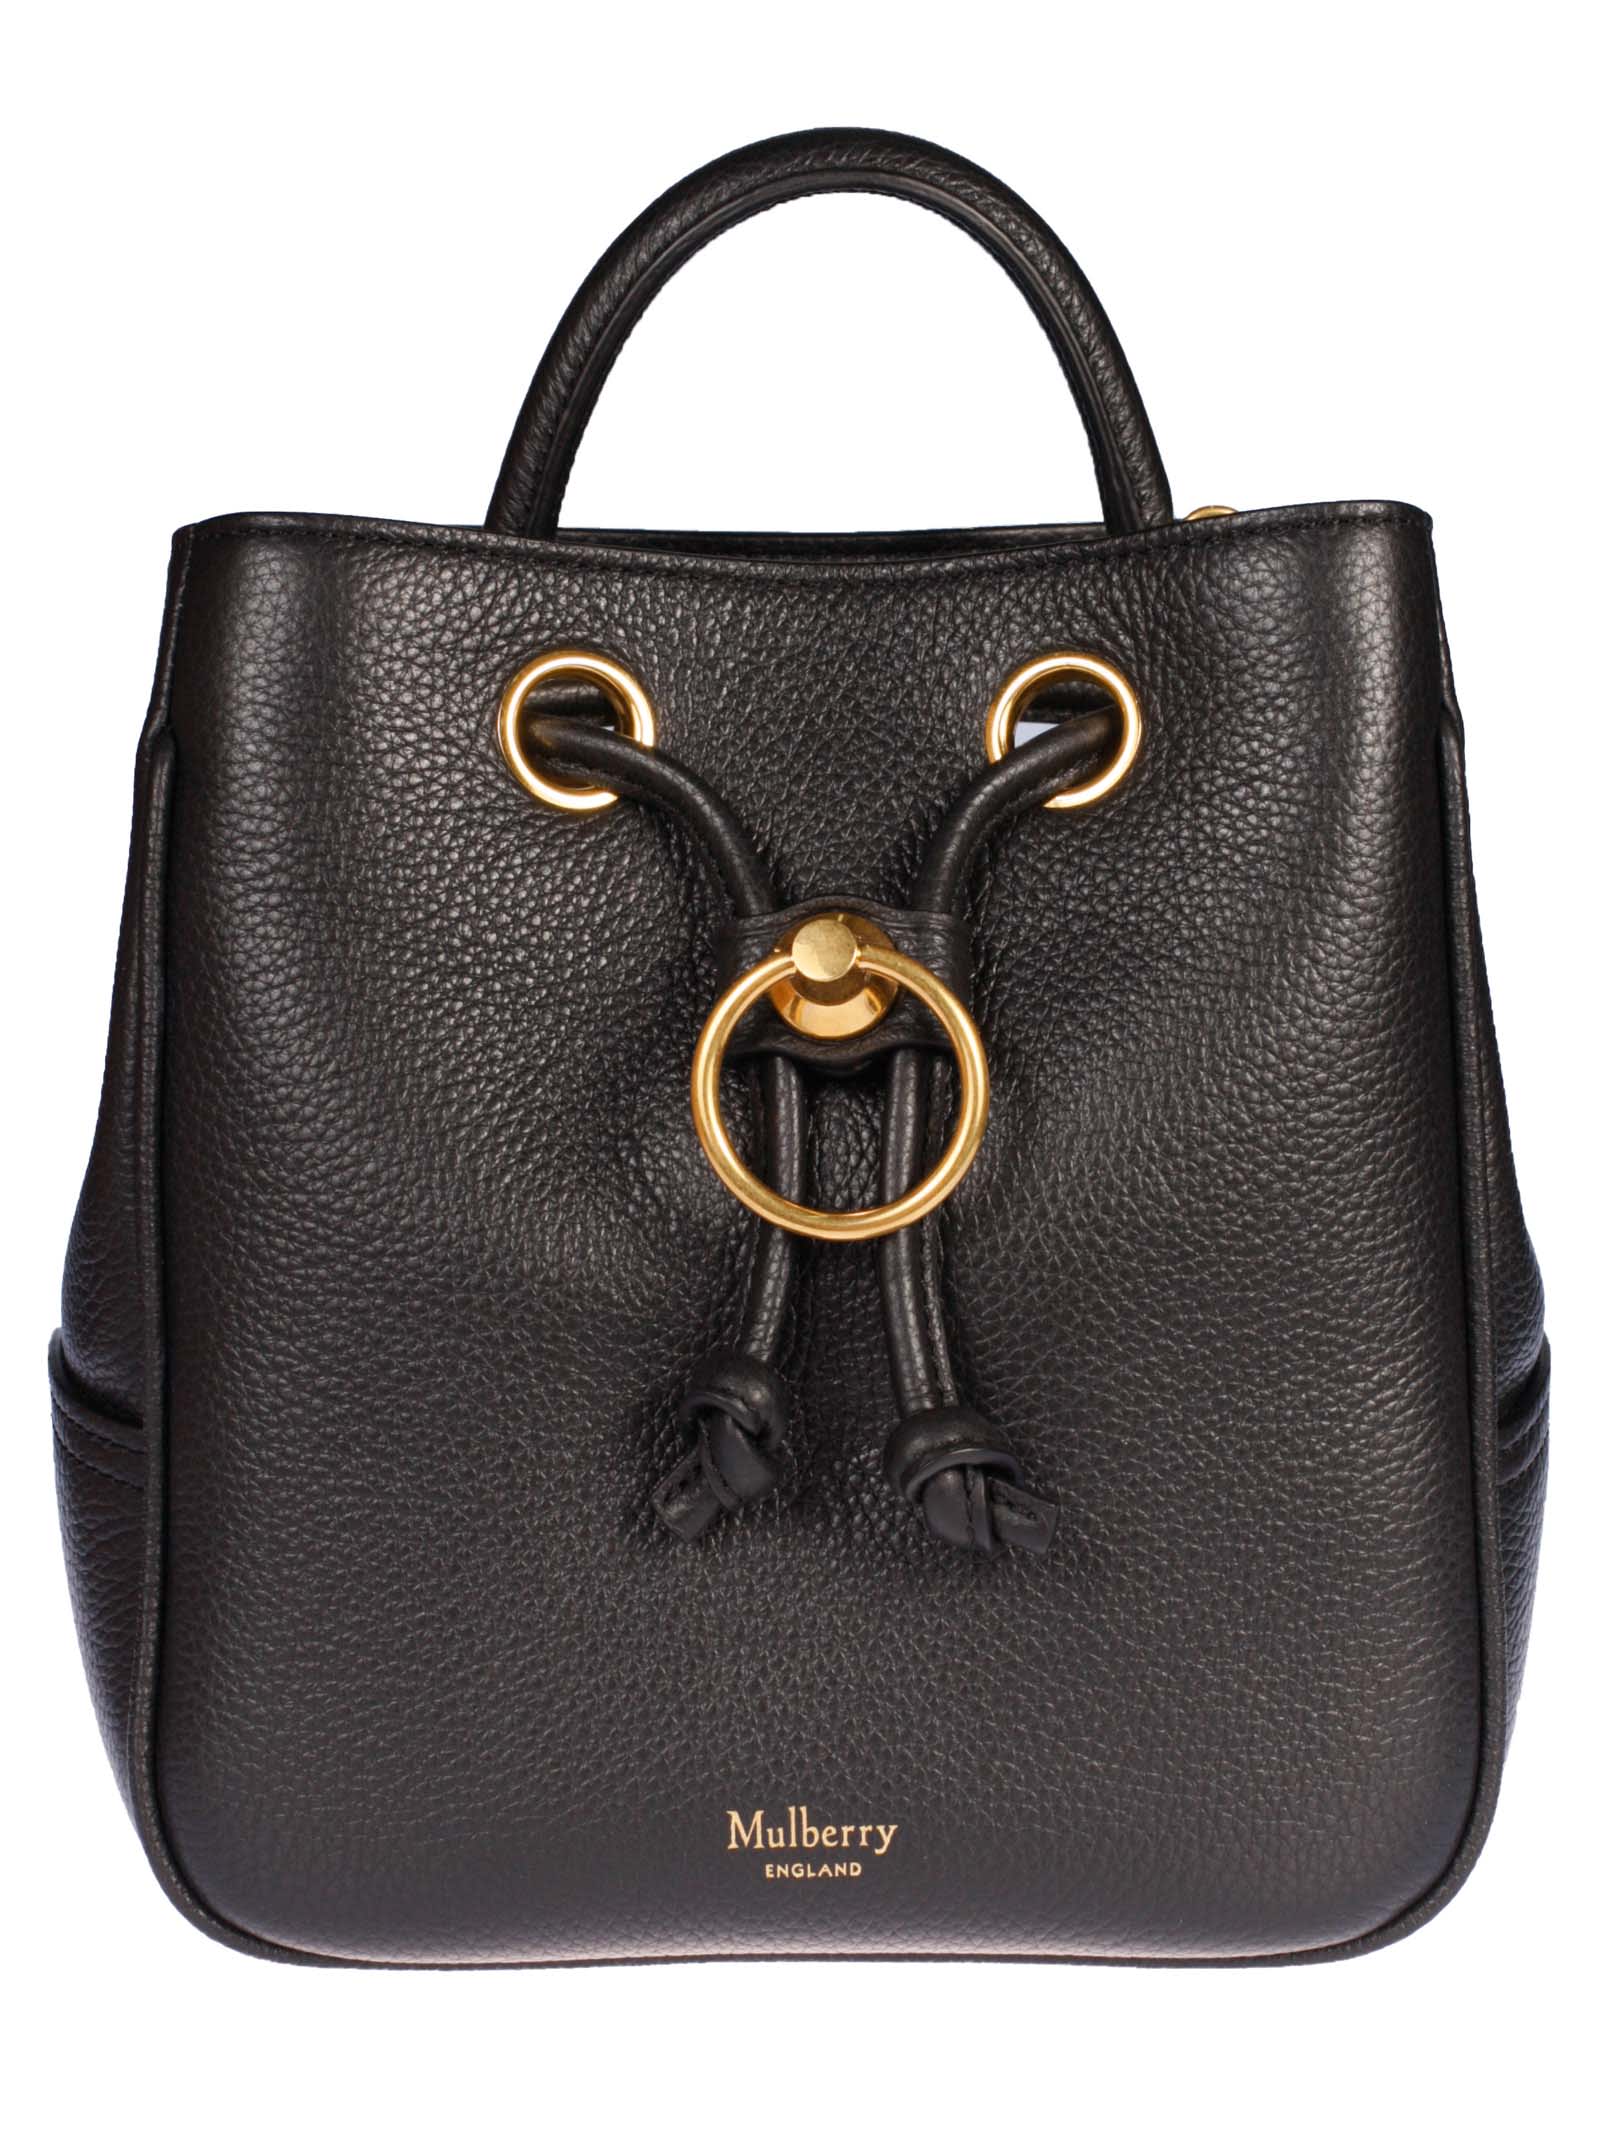 Mulberry Mulberry Small Hampstead Shoulder Bag - Black - 11020223 | italist